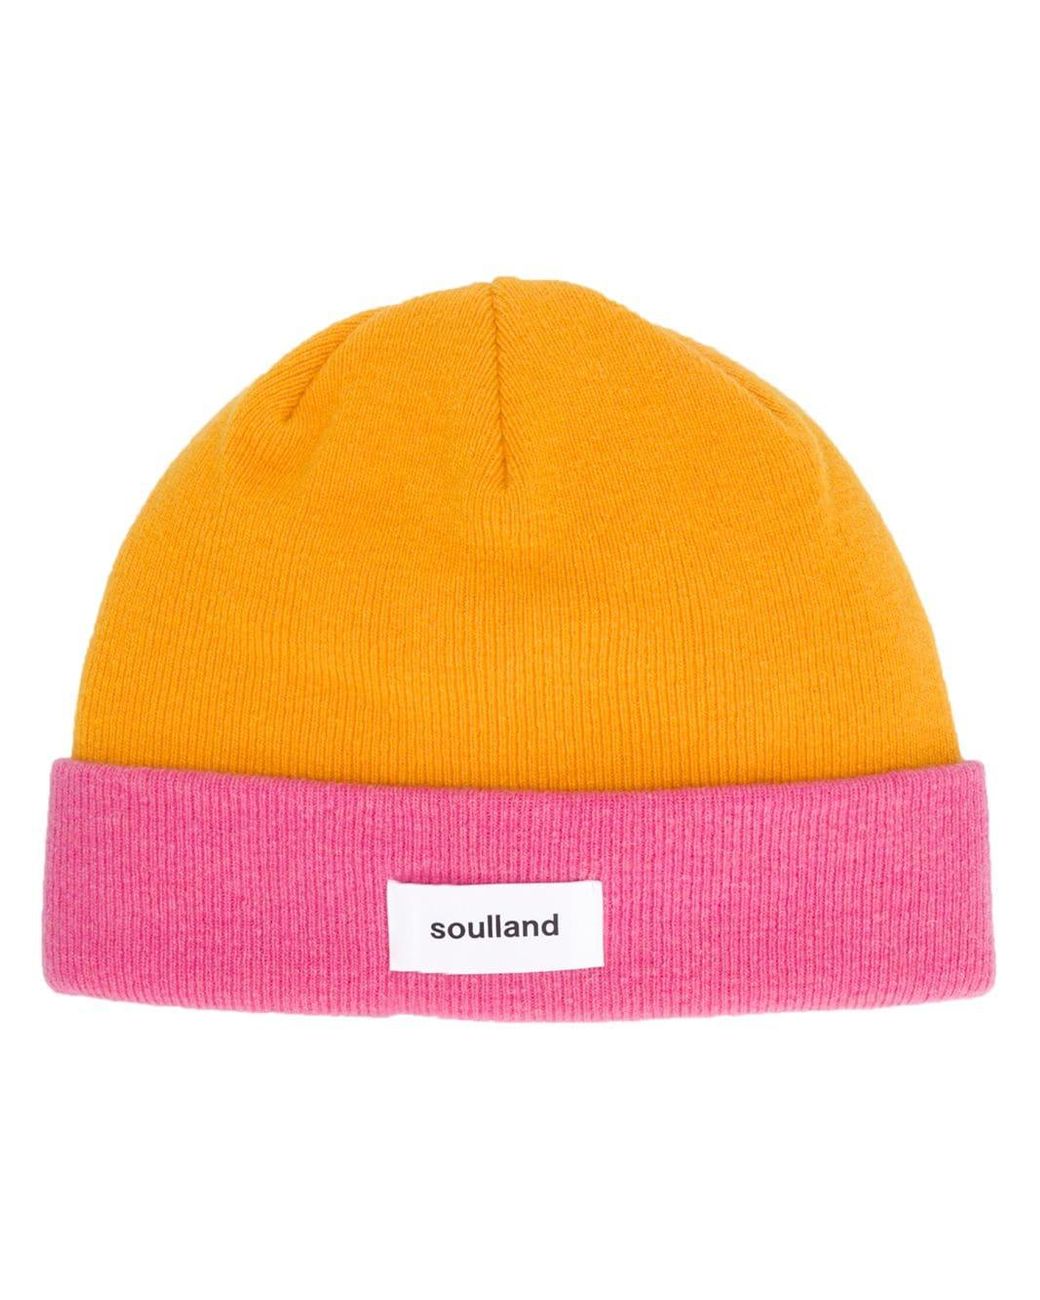 Soulland Wool Villy Colour-block Beanie in Yellow for Men - Lyst